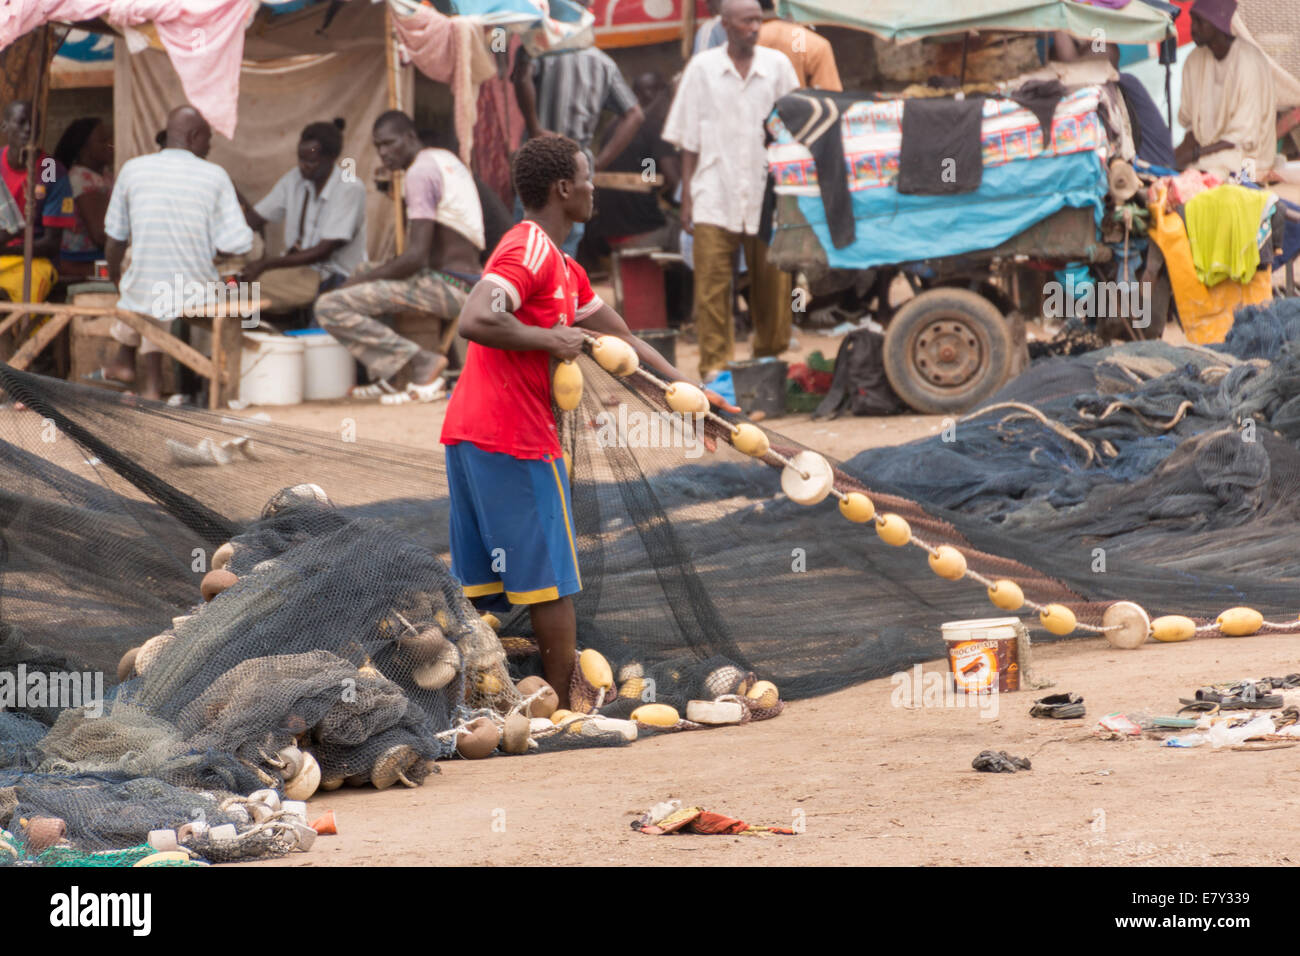 Mbour, Senegal - July, 2014: Fishermen set up their nets to go back to the see at the local fish market in Mbour on July 9, 2014 Stock Photo